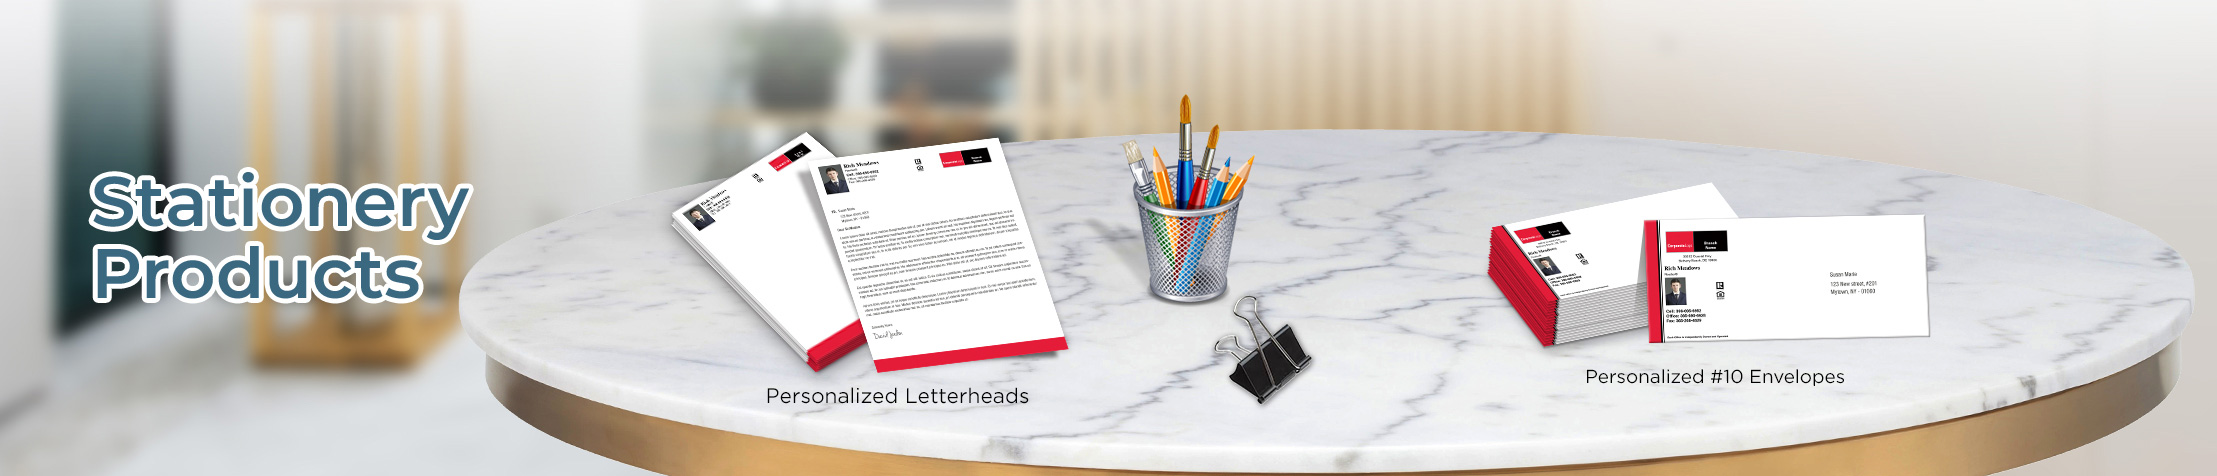 Real Living Real Estate Stationery Products - Custom Letterhead & Envelopes Stationery Products for Realtors | BestPrintBuy.com